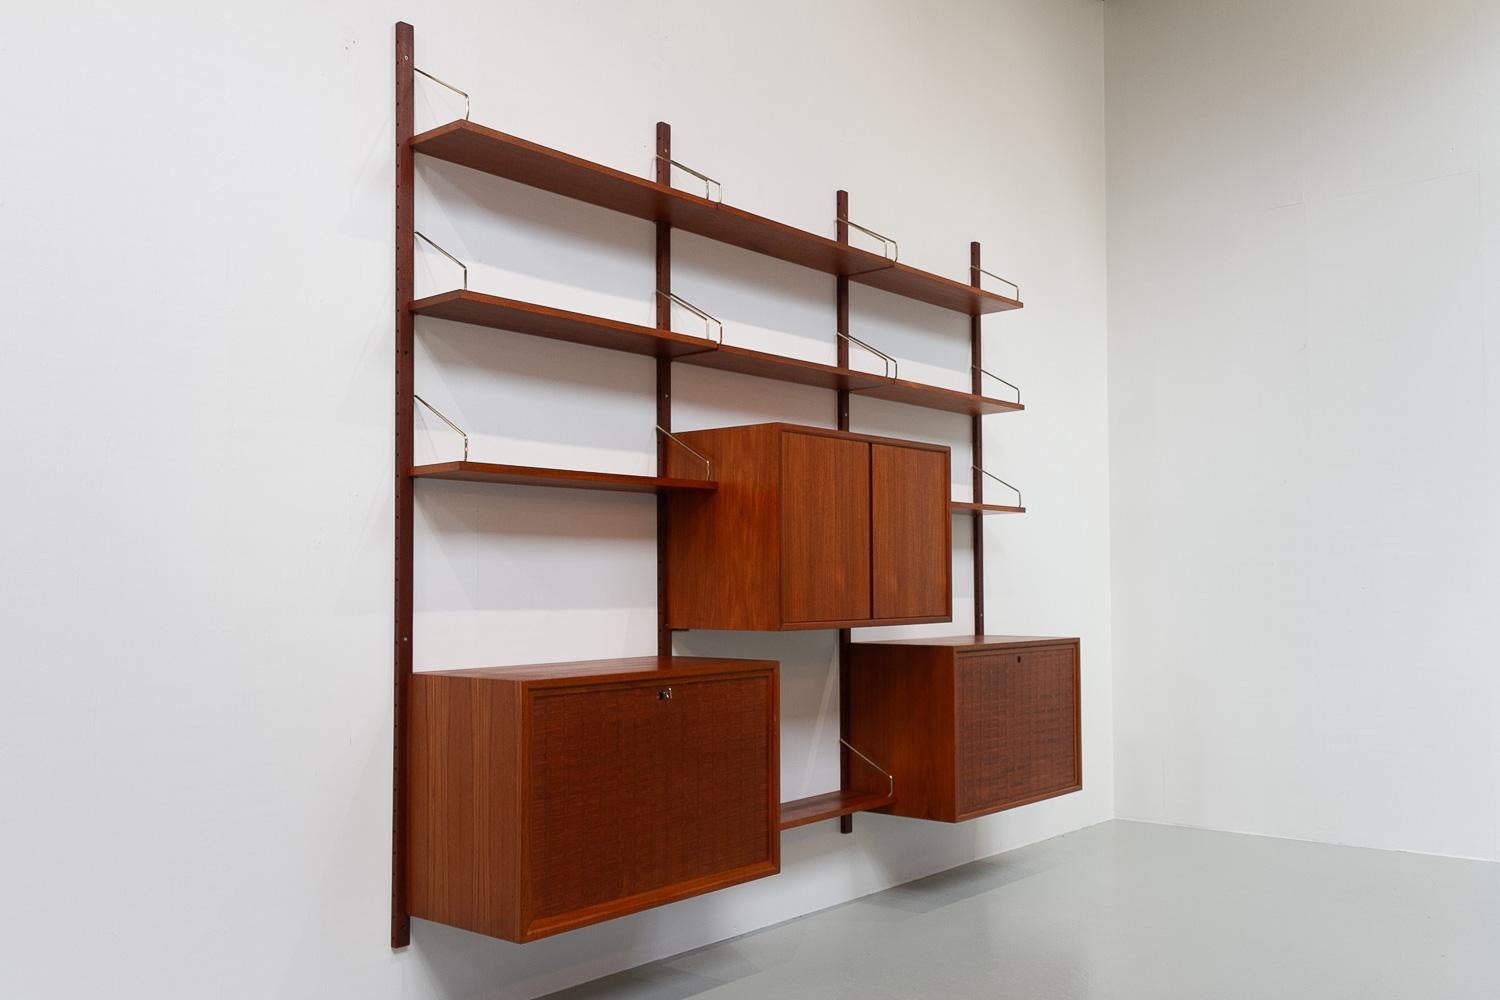 Danish Modern 3-Bay Modular Teak Wall Unit by Poul Cadovius for Cado, 1960s.

Mid-Century Modern 3 bay shelving system model Royal. This is an original vintage floating bookcase designed in 1948 by Danish architect Poul Cadovius. 
Cadovius had the